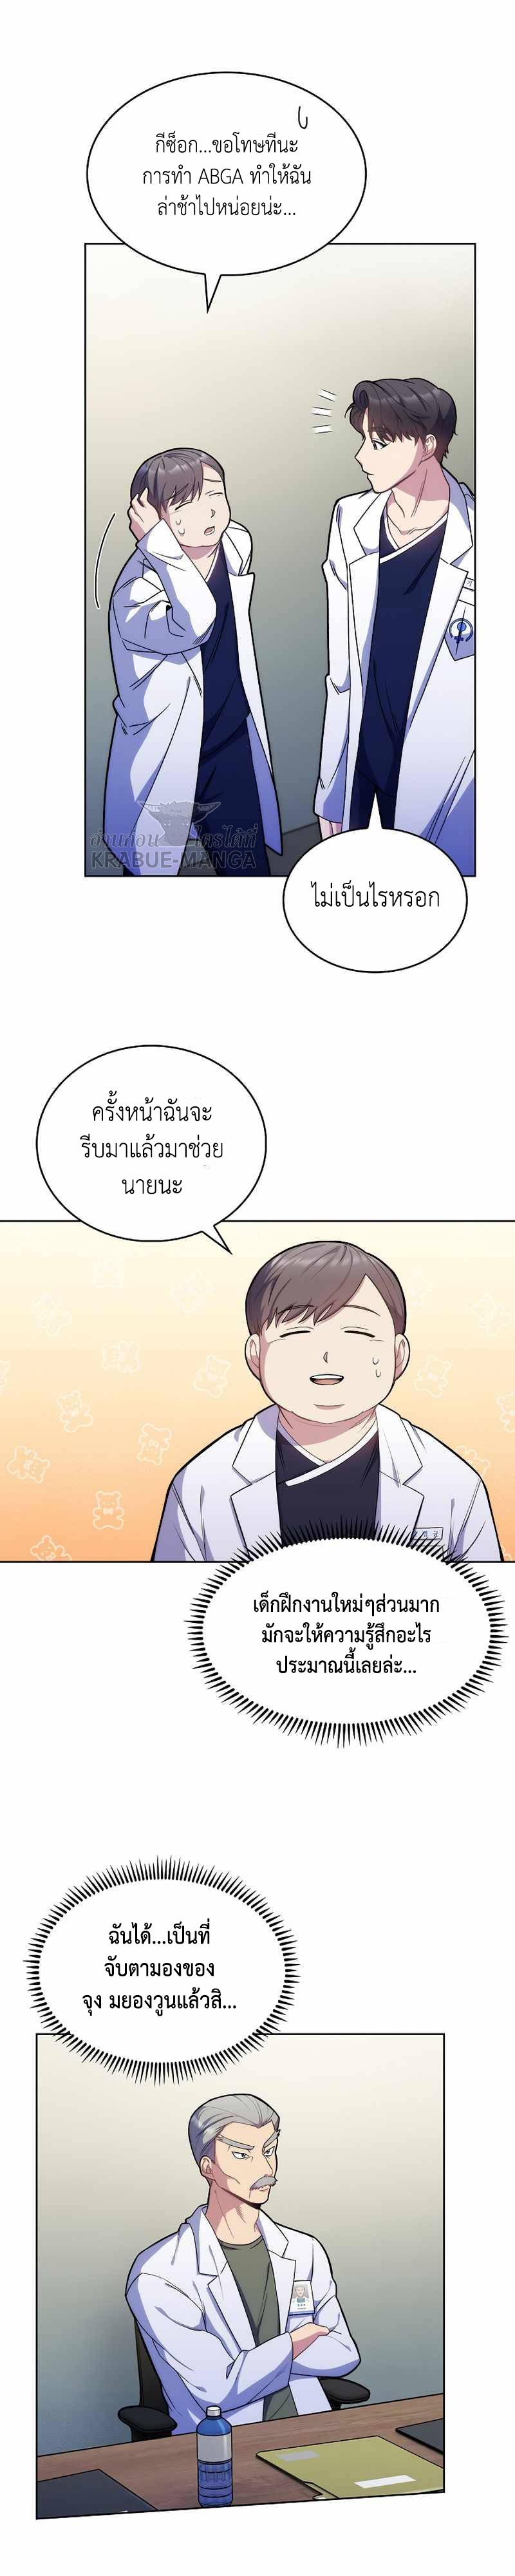 Level Up Doctor 12 (5)